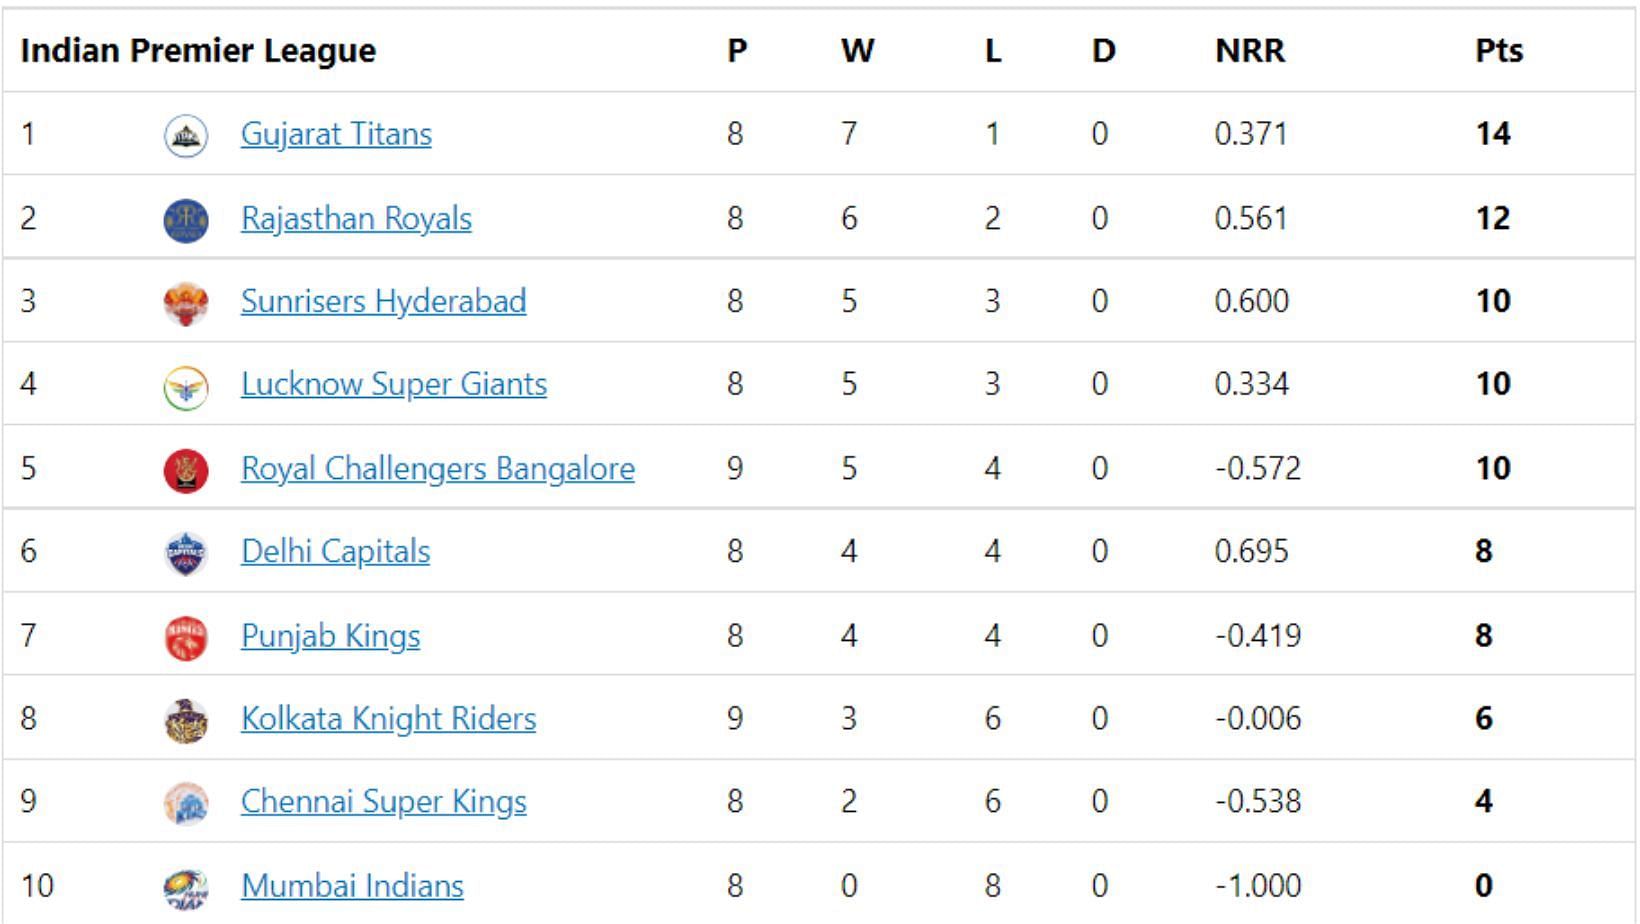 Delhi Capitals jump to No. 6 in the IPL 2022 Points Table.